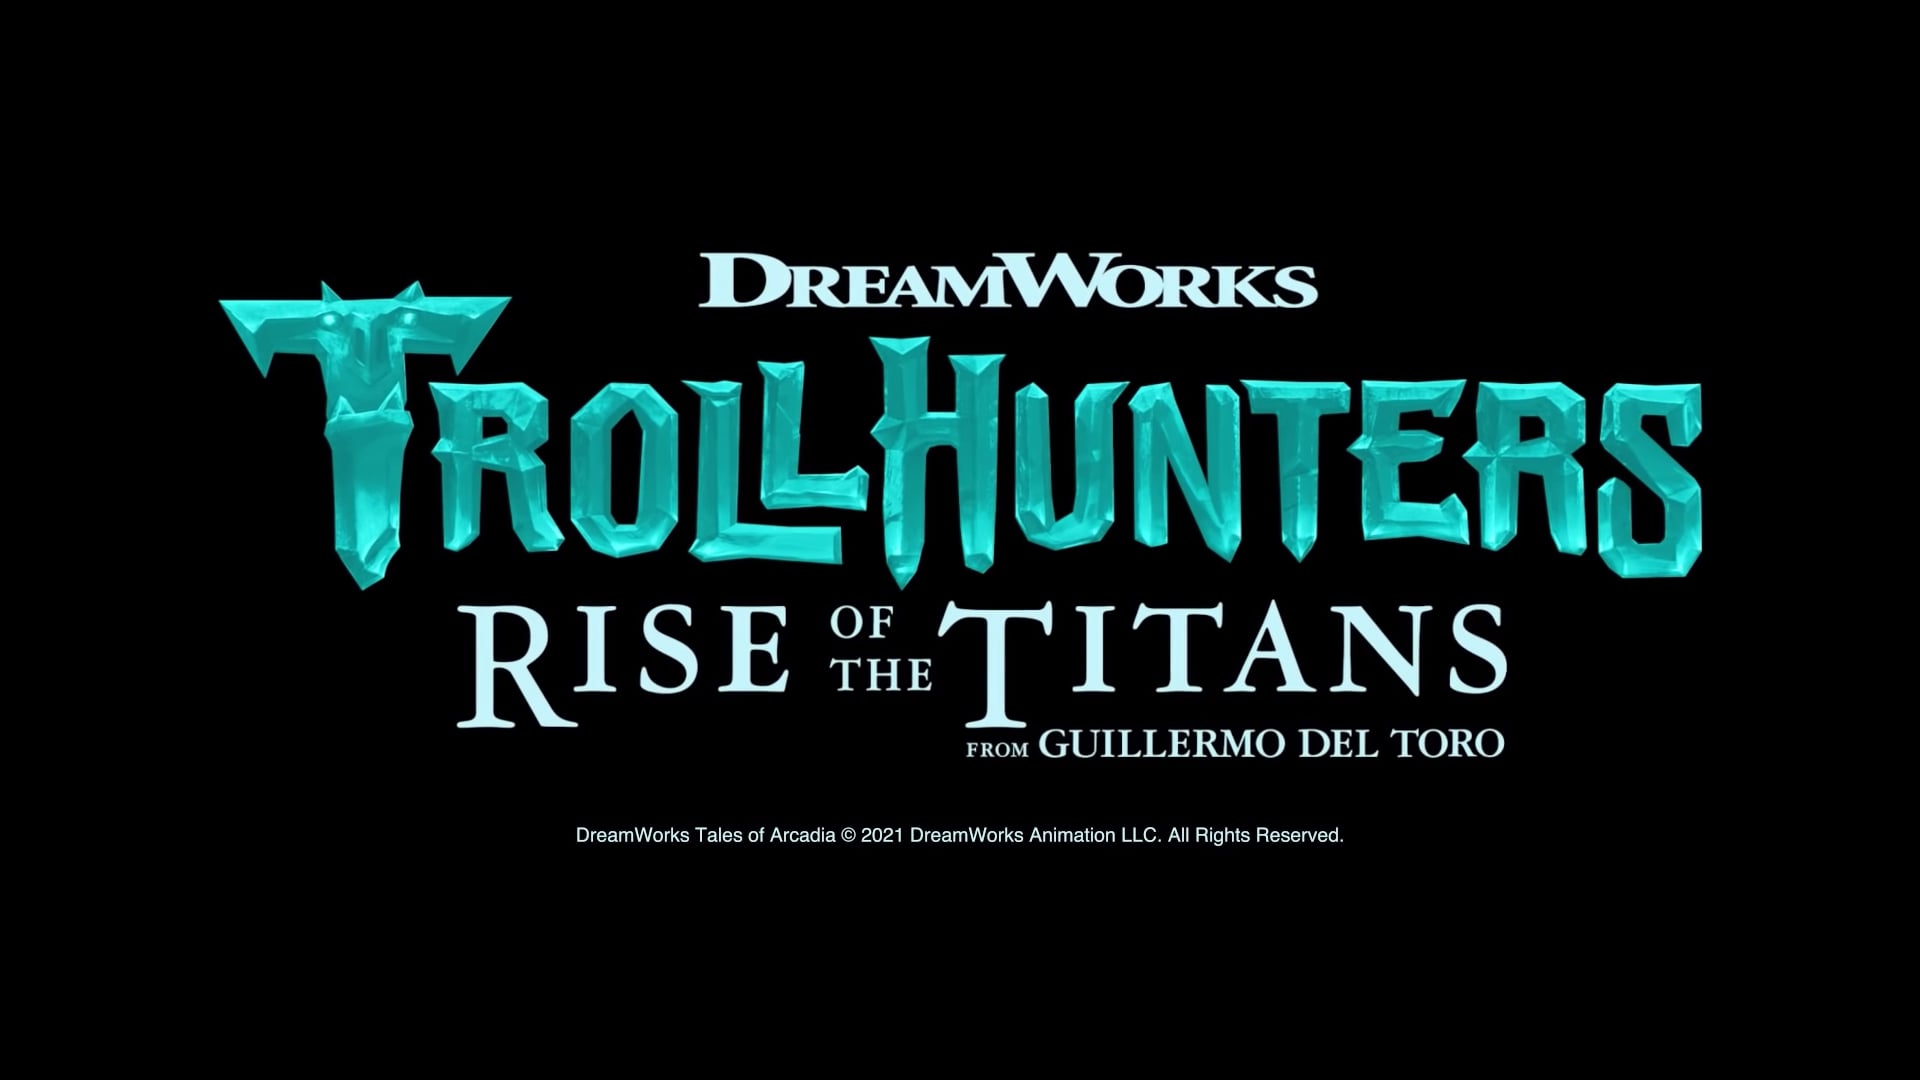 Netflix Trollhunters Rise Of The Titans Trailer, Coming to Netflix in July 2021